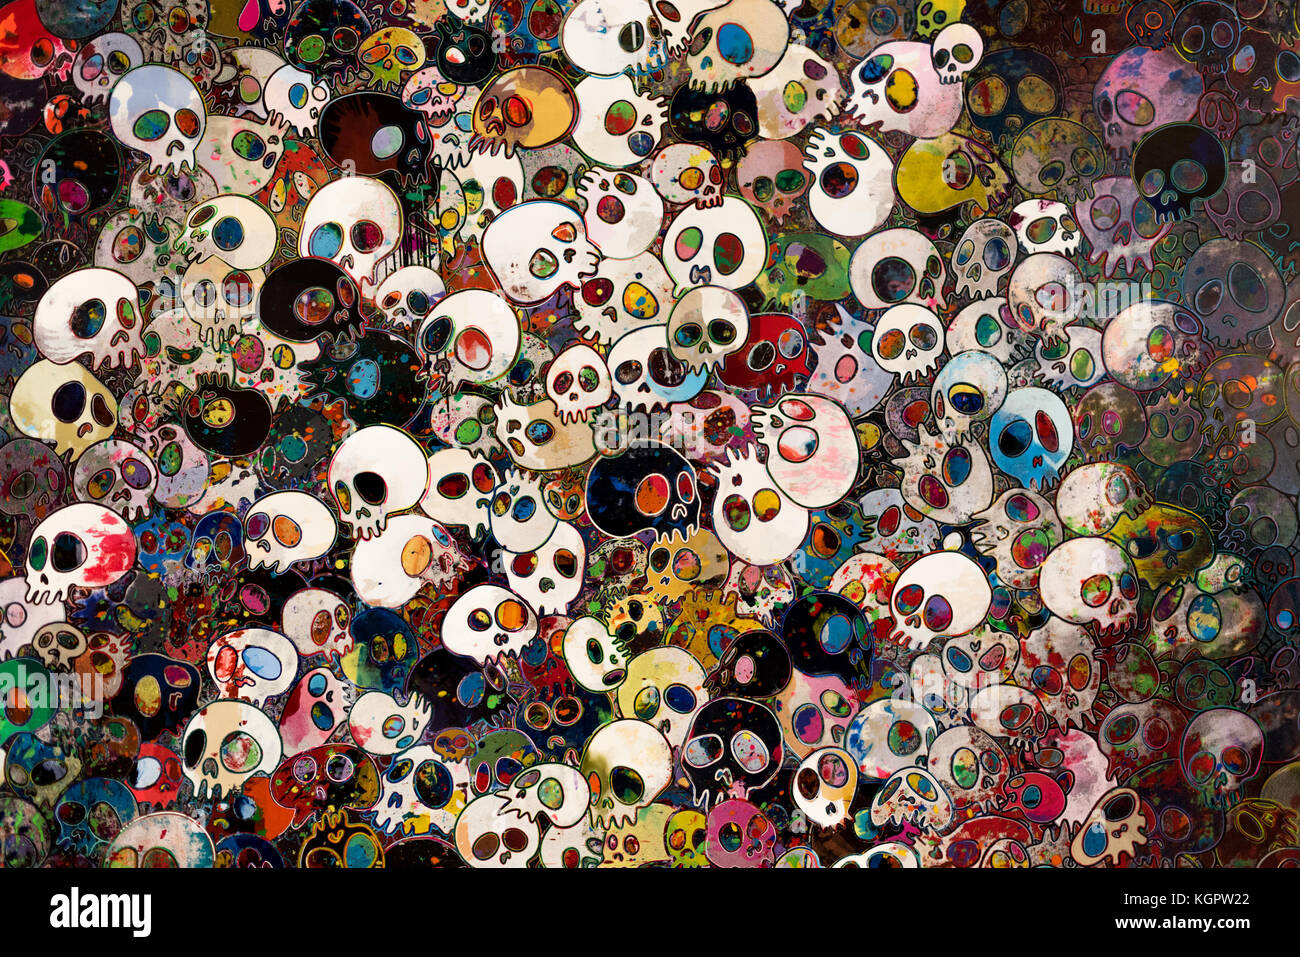 View the New Takashi Murakami Exhibition at The Broad in Los Angeles